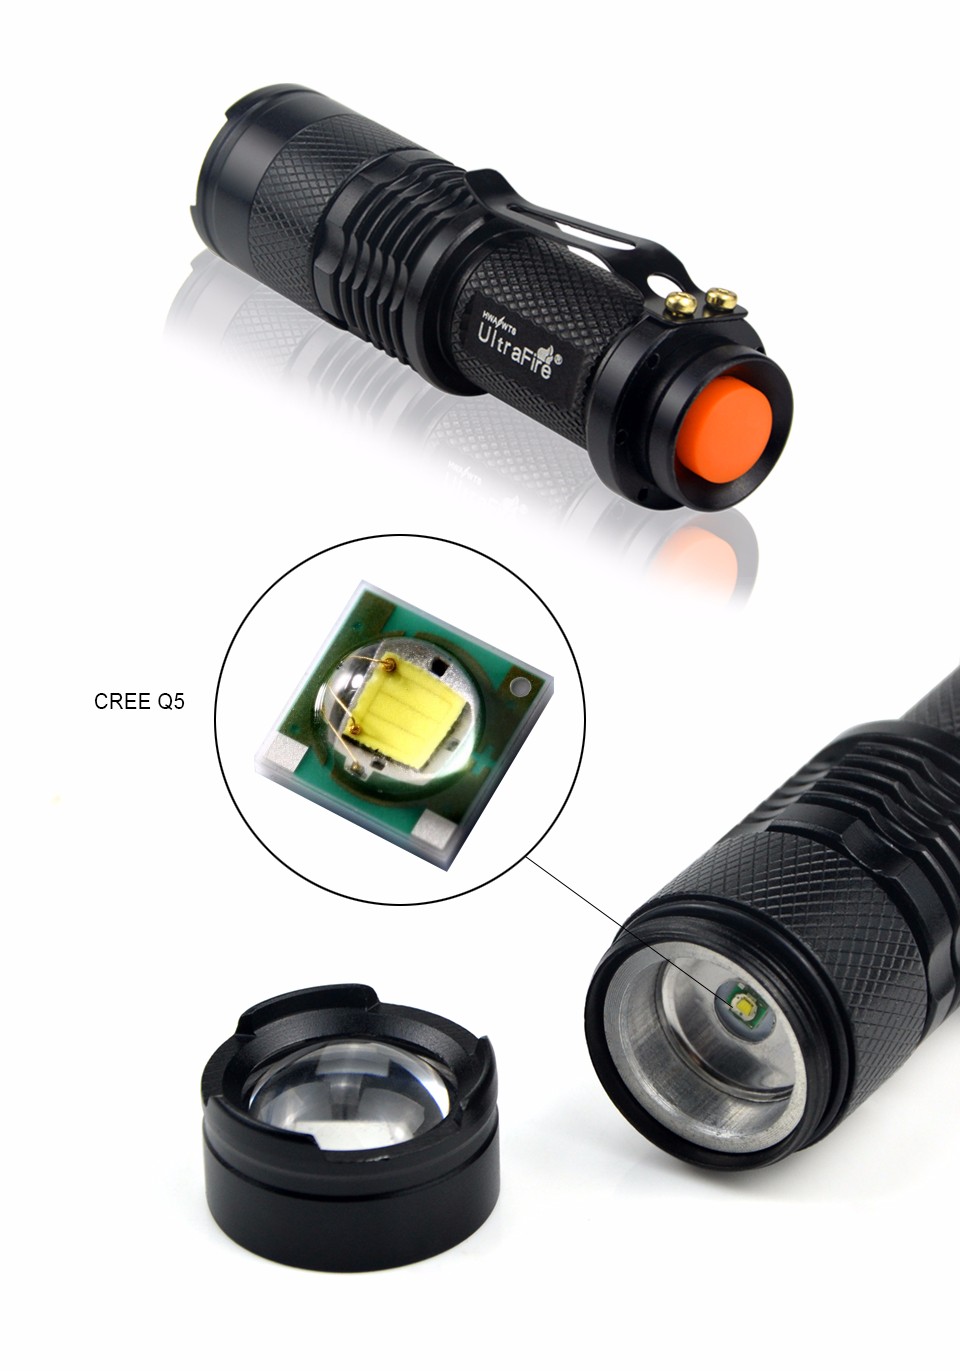 Portable Waterproof Aluminum CREE Q5 1000LM LED Flashlight 3 Modes Zoomable Torch lights Laser Flashlight For Outdoor lighting